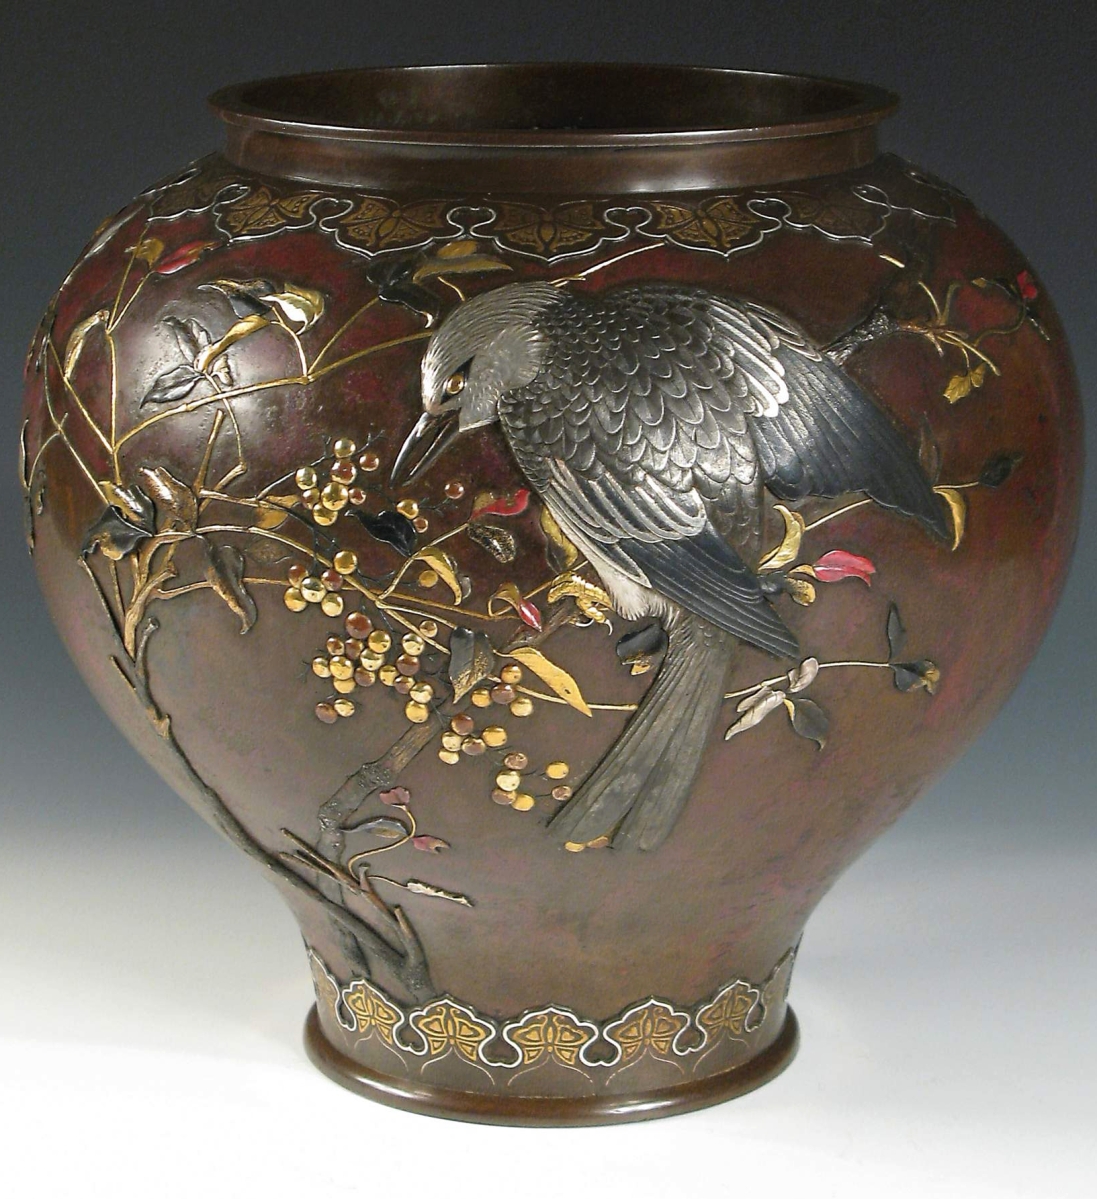 A major Meiji period bronze vase, inlaid and overlaid with precious multimetals and colored enamels, signed by Suzuki Chokichi with his art name, Kako, and having a double mountain mark on base. A similar vase is exhibited in the V&A Museum in London.